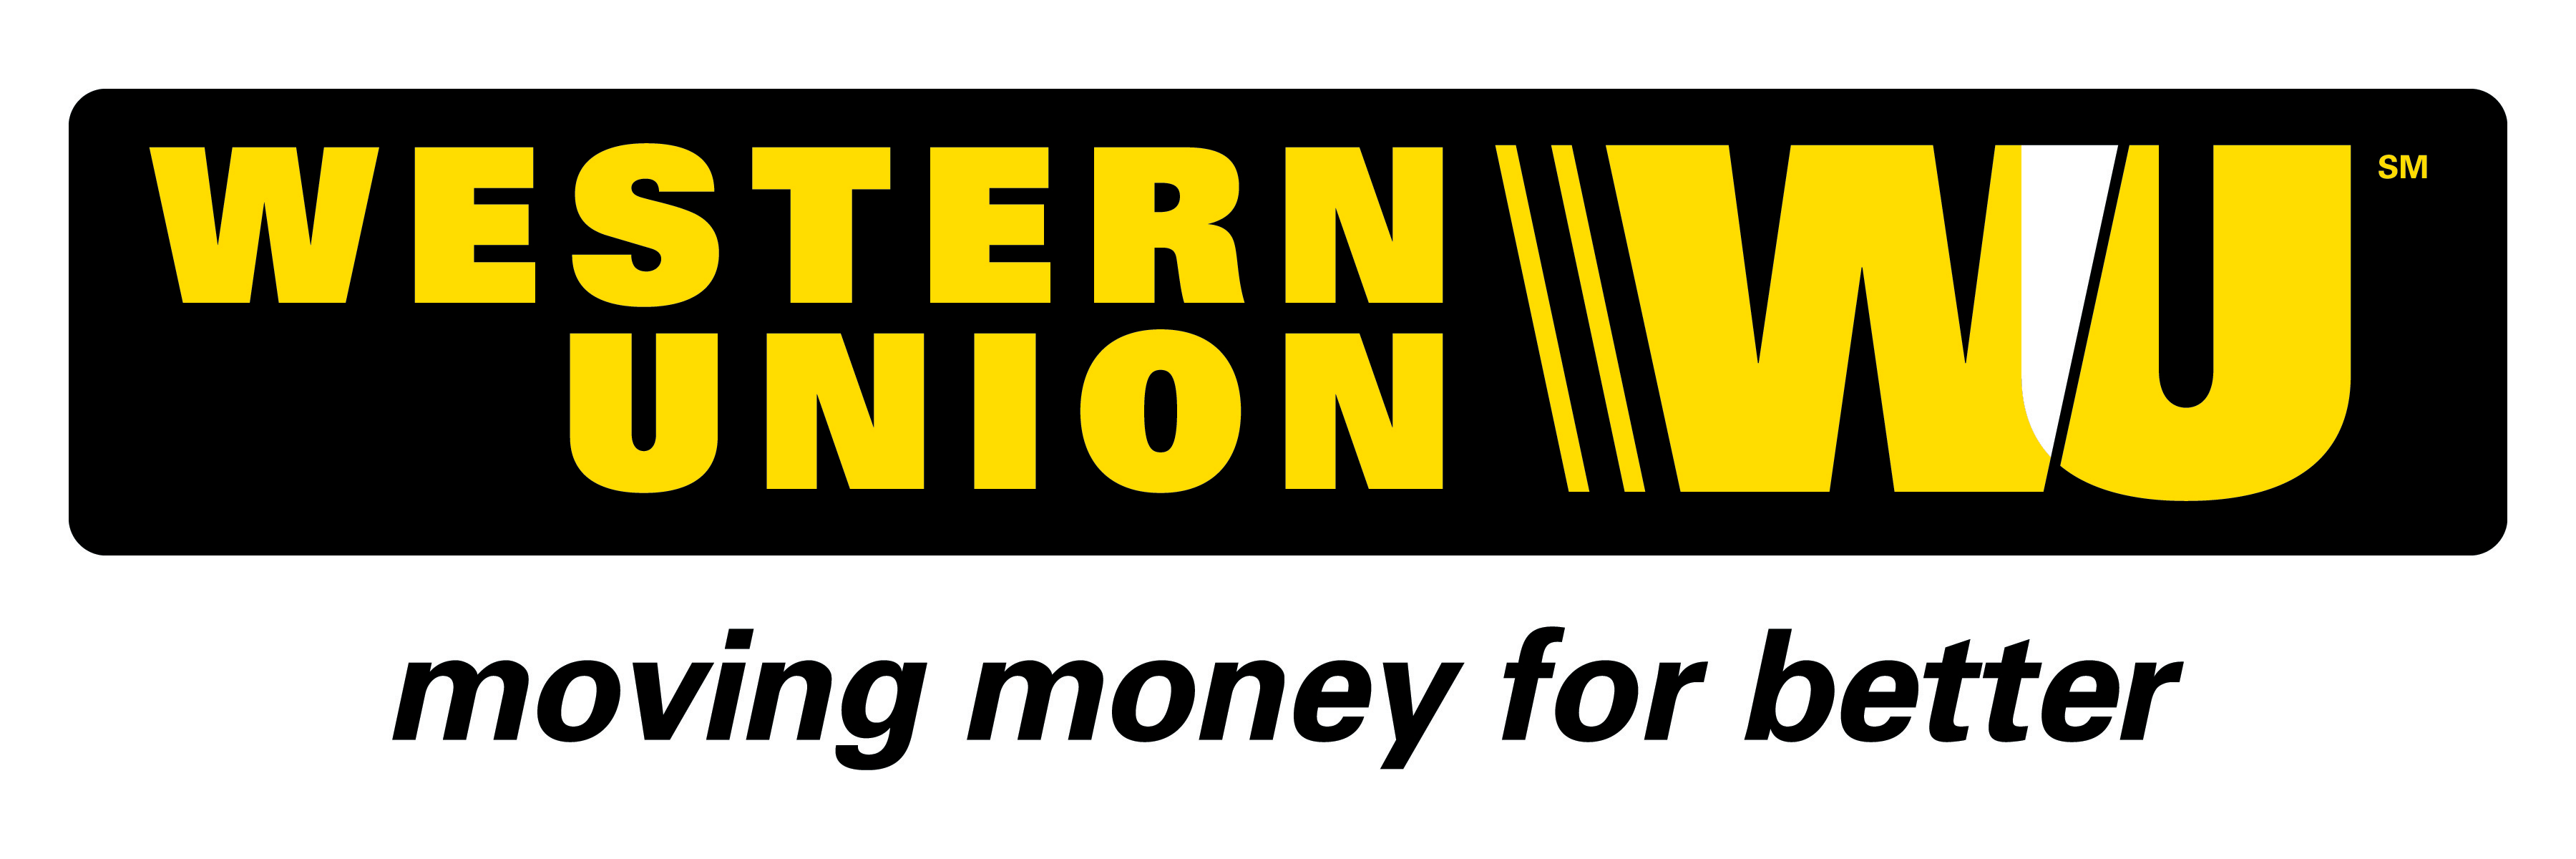 Get $250 From Western Union! 